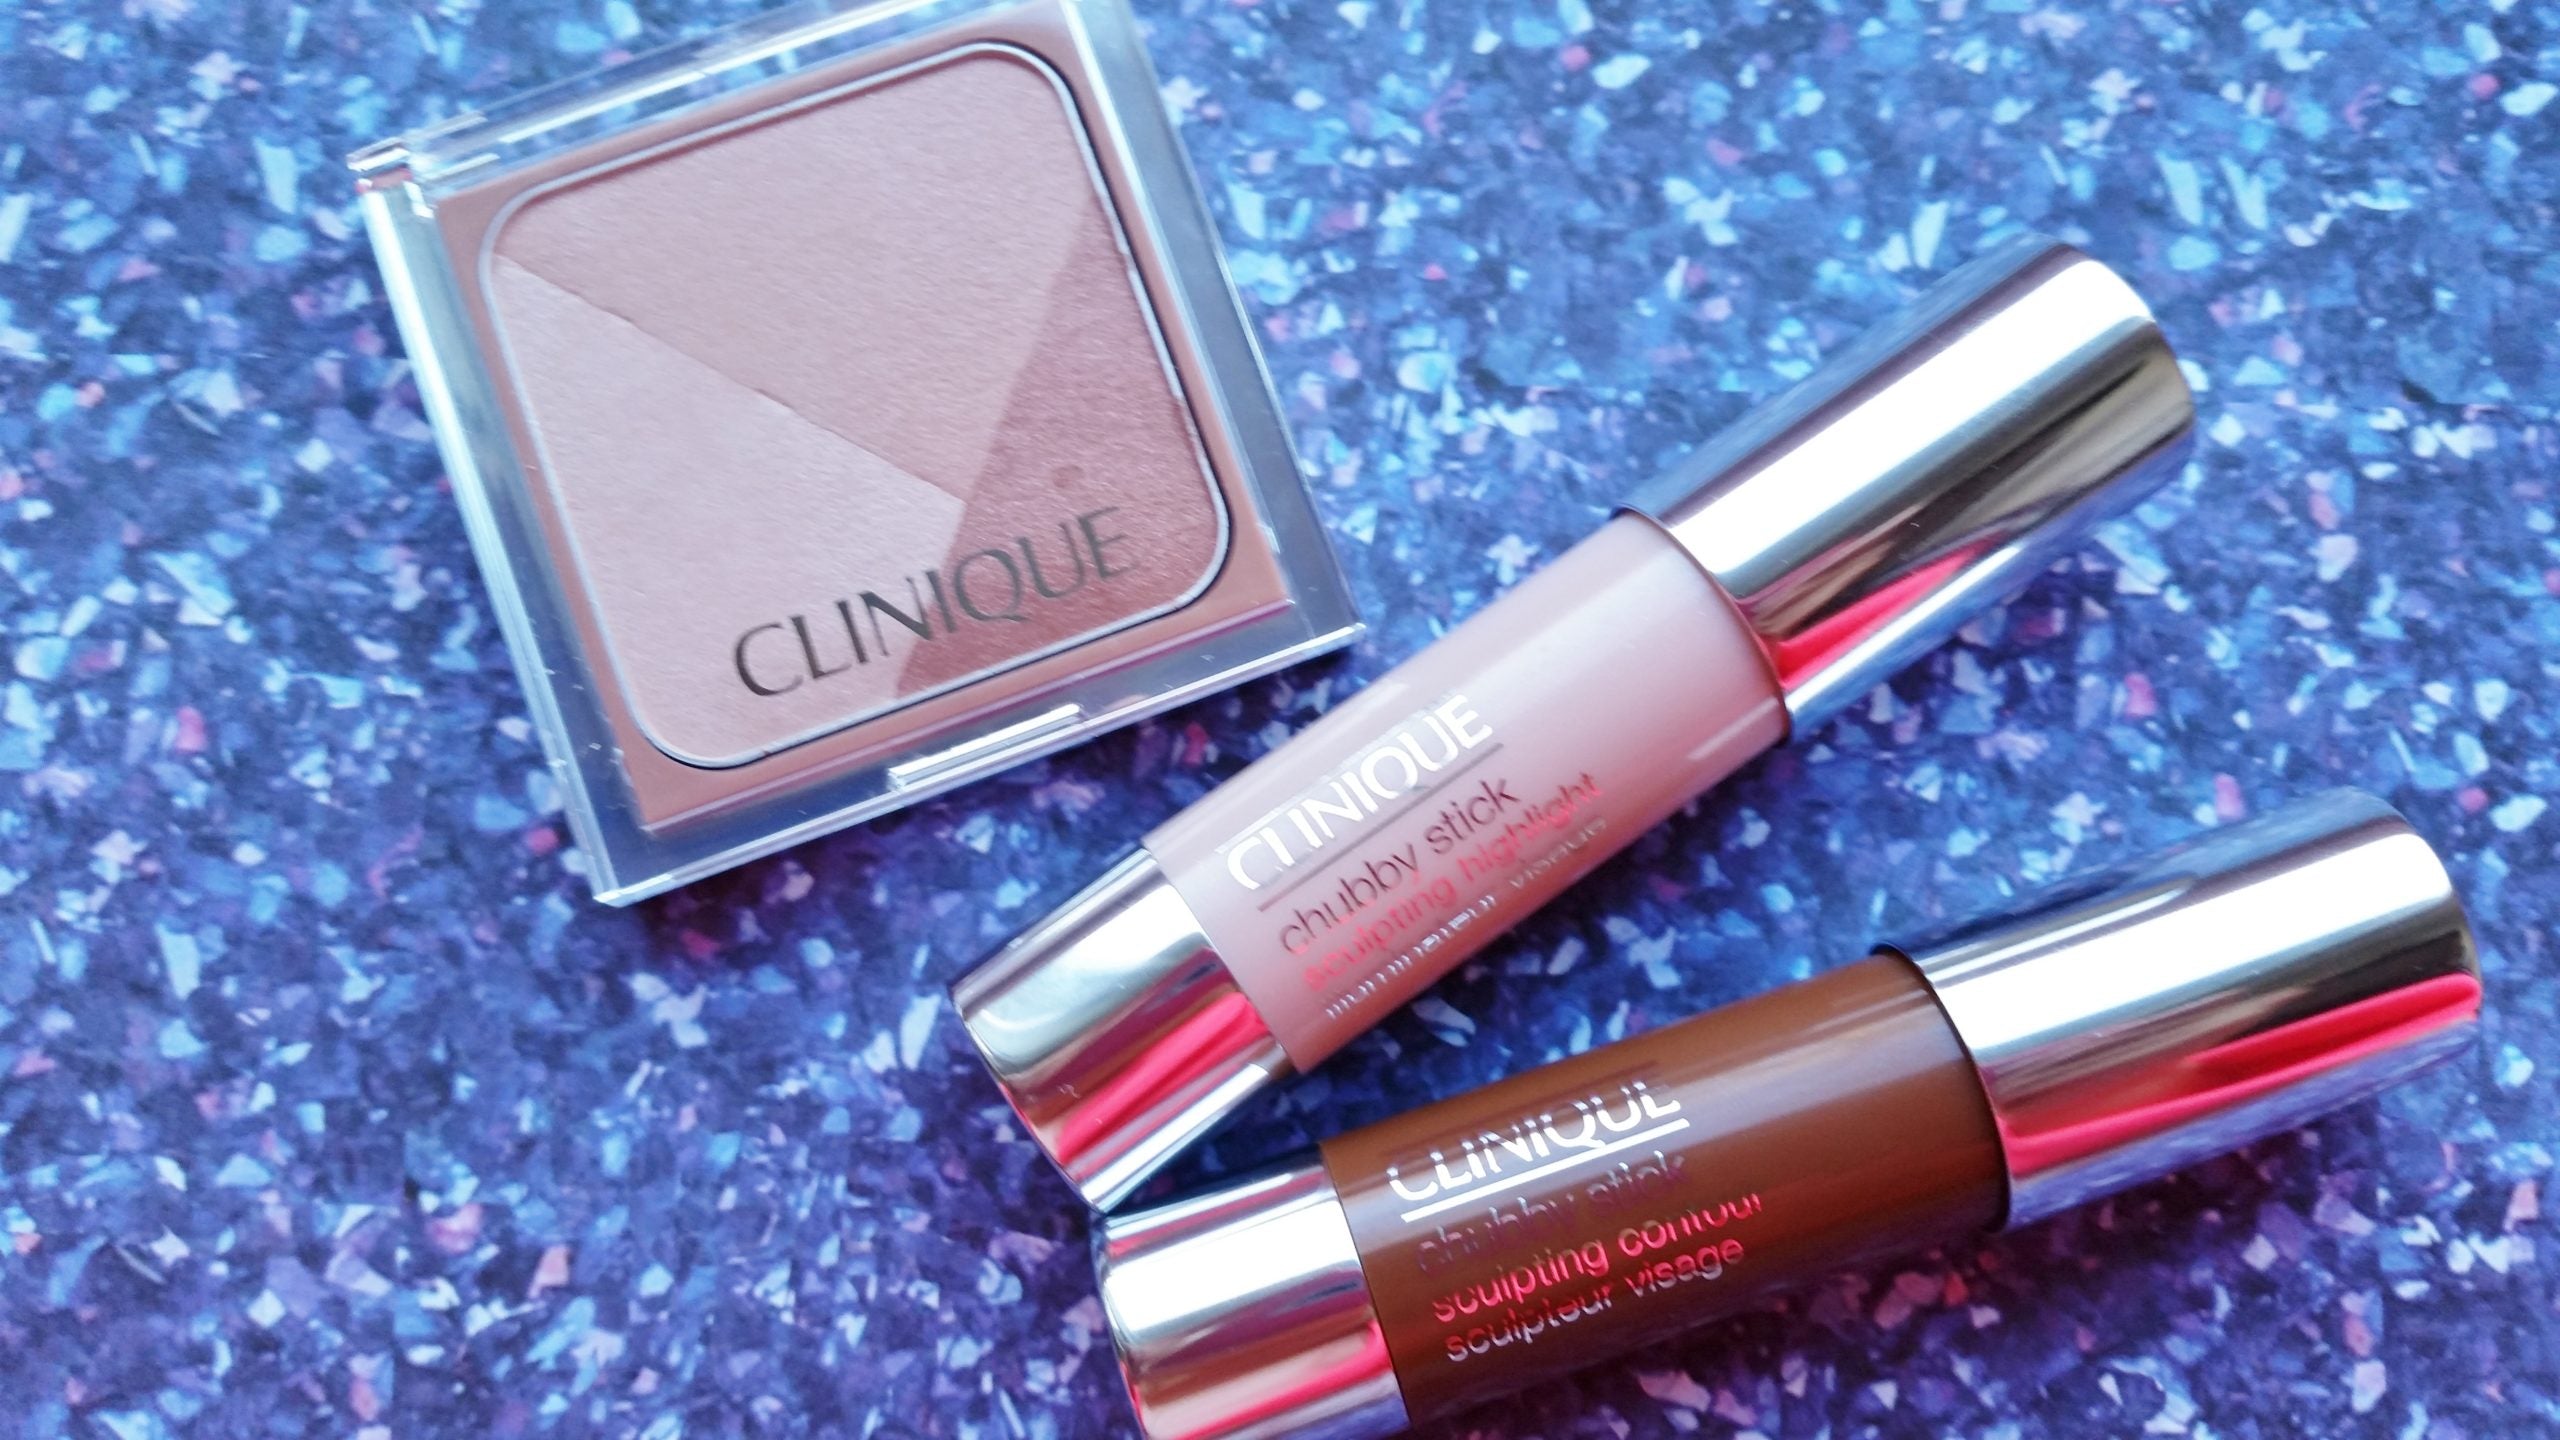 Review, Swatches: Clinique Hello Cheekbones Spring 2015 Makeup Collection - Sculptionary Contouring Palette, Chubby Stick Sculpting Highlight, Contour